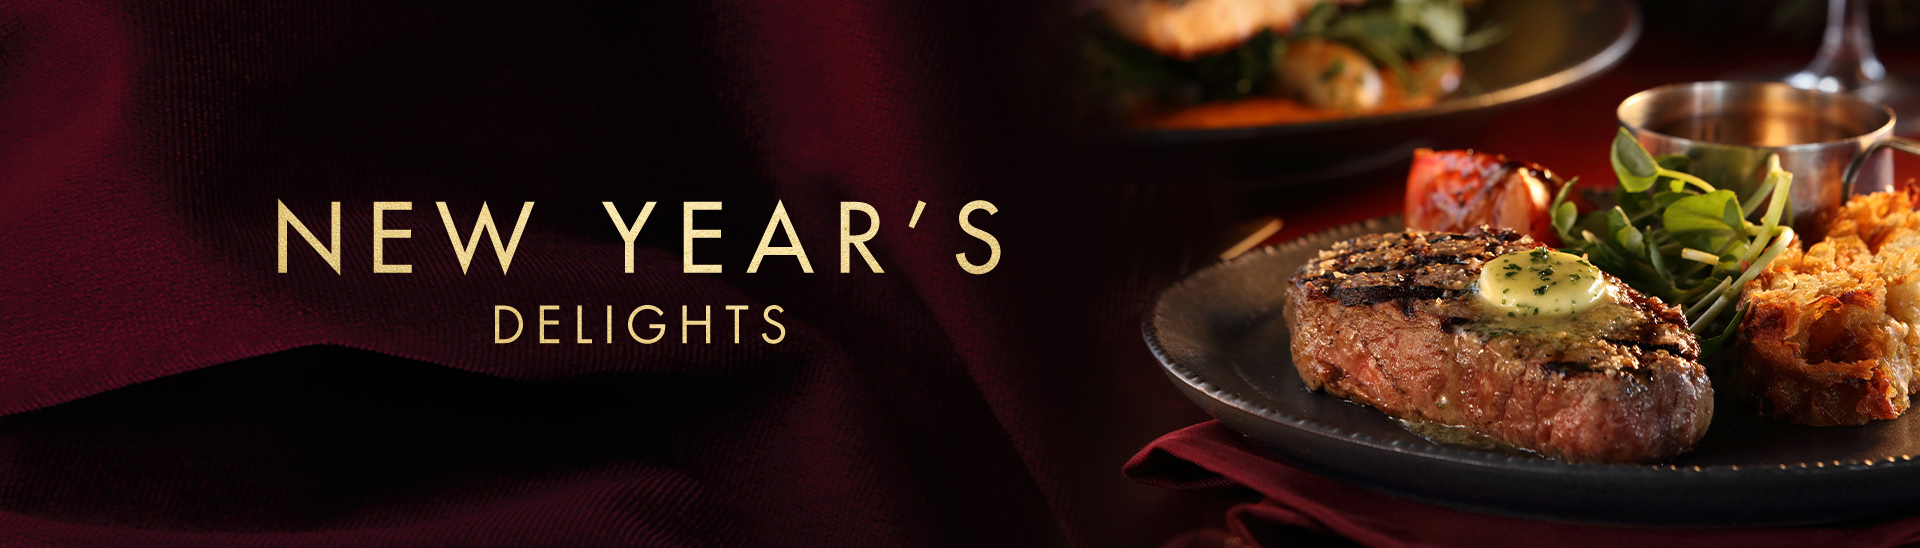 New Year’s Eve 2019 at Miller & Carter Stratford-upon-Avon